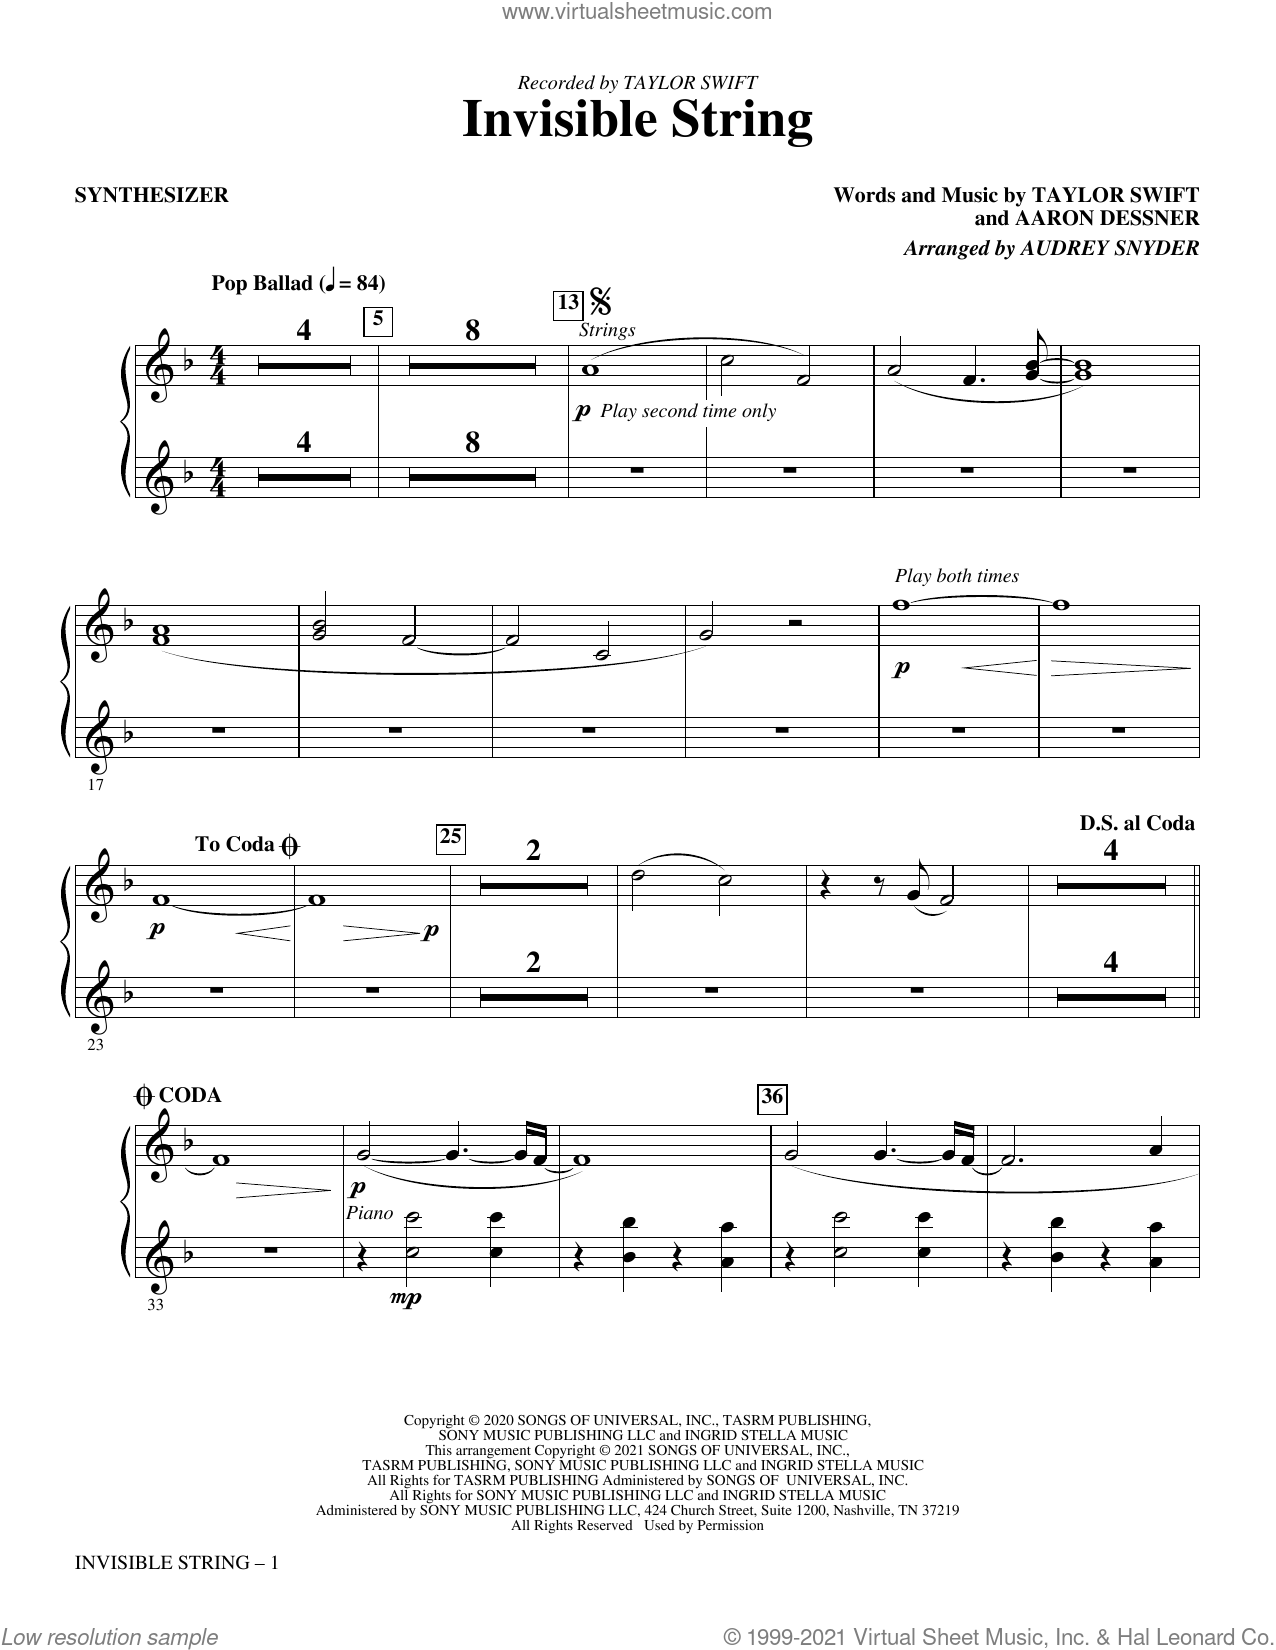 Invisible String by Taylor Swift - Violin Solo - Digital Sheet